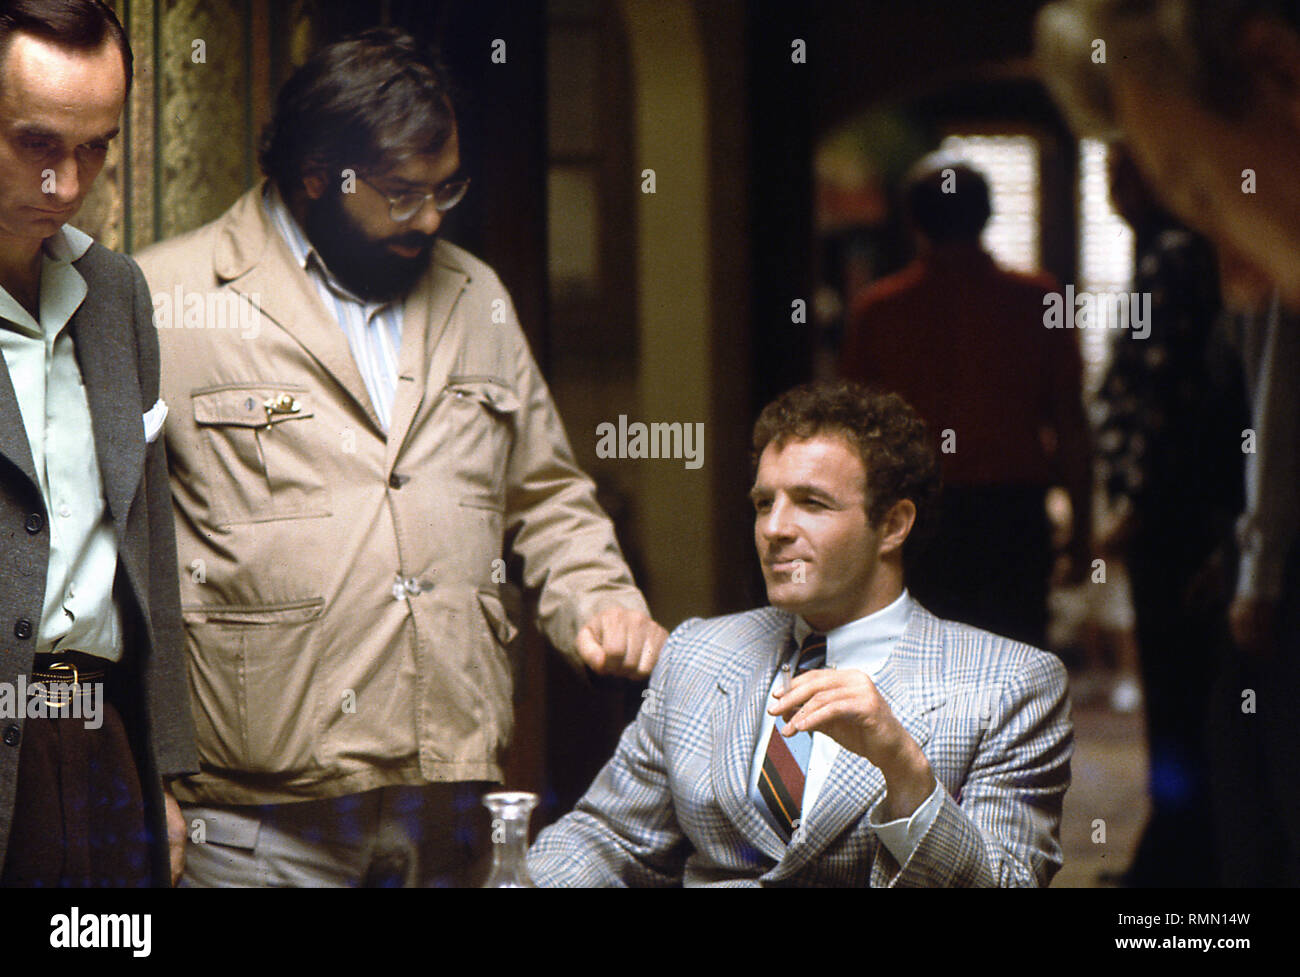 John Cazale, Director Francis Ford Coppola, James Caan, 'The Godfather' (1972) Paramount Pictures  File Reference # 33751 363THA Stock Photo